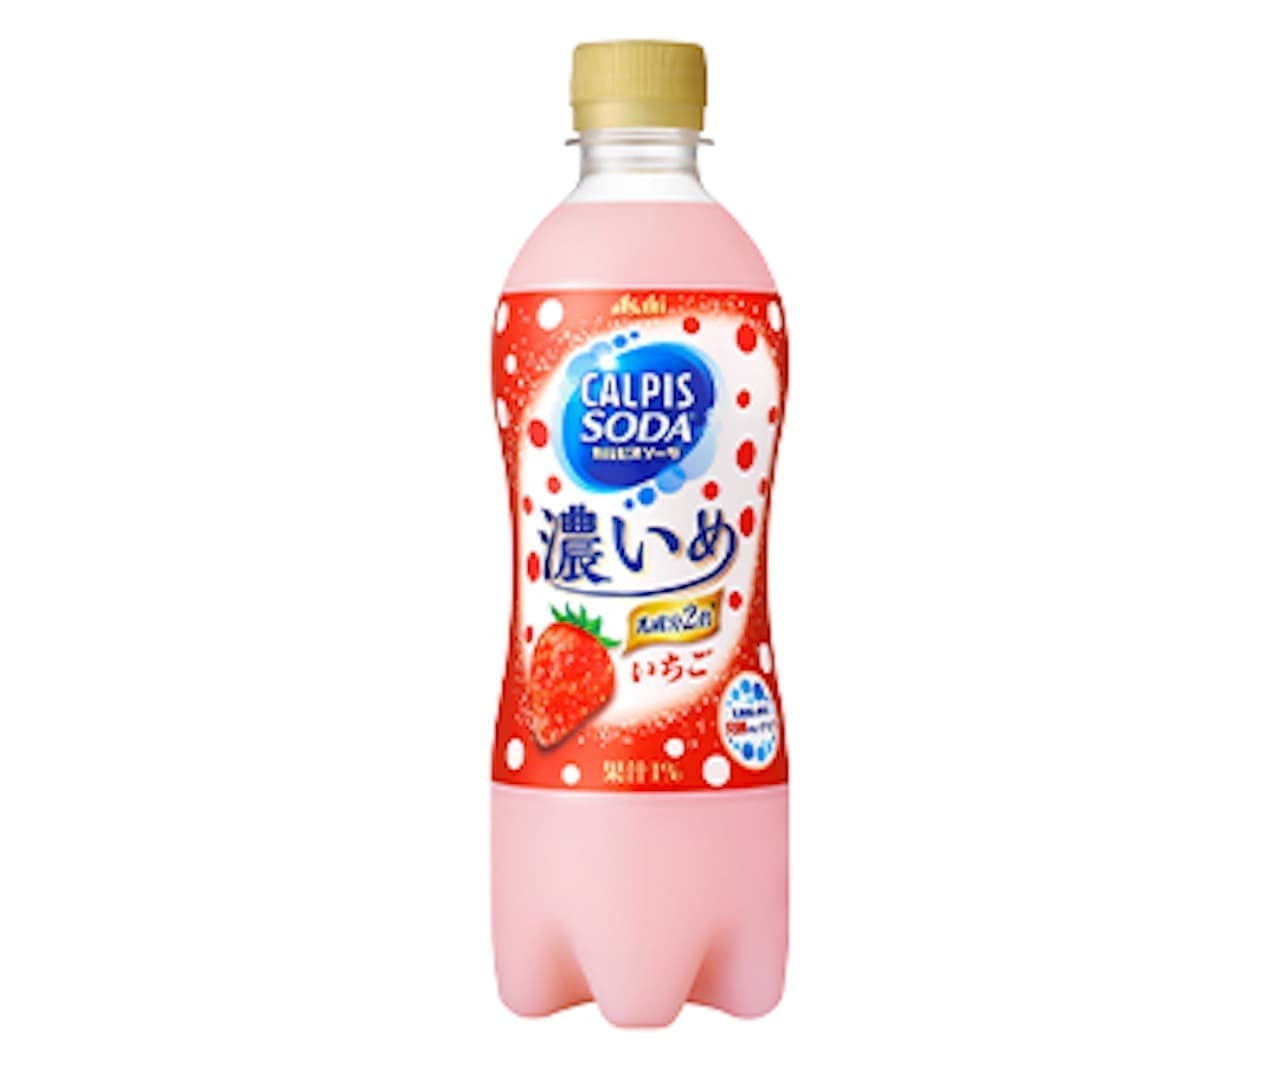 "" Calpis Soda "Dark Strawberry" for a limited time